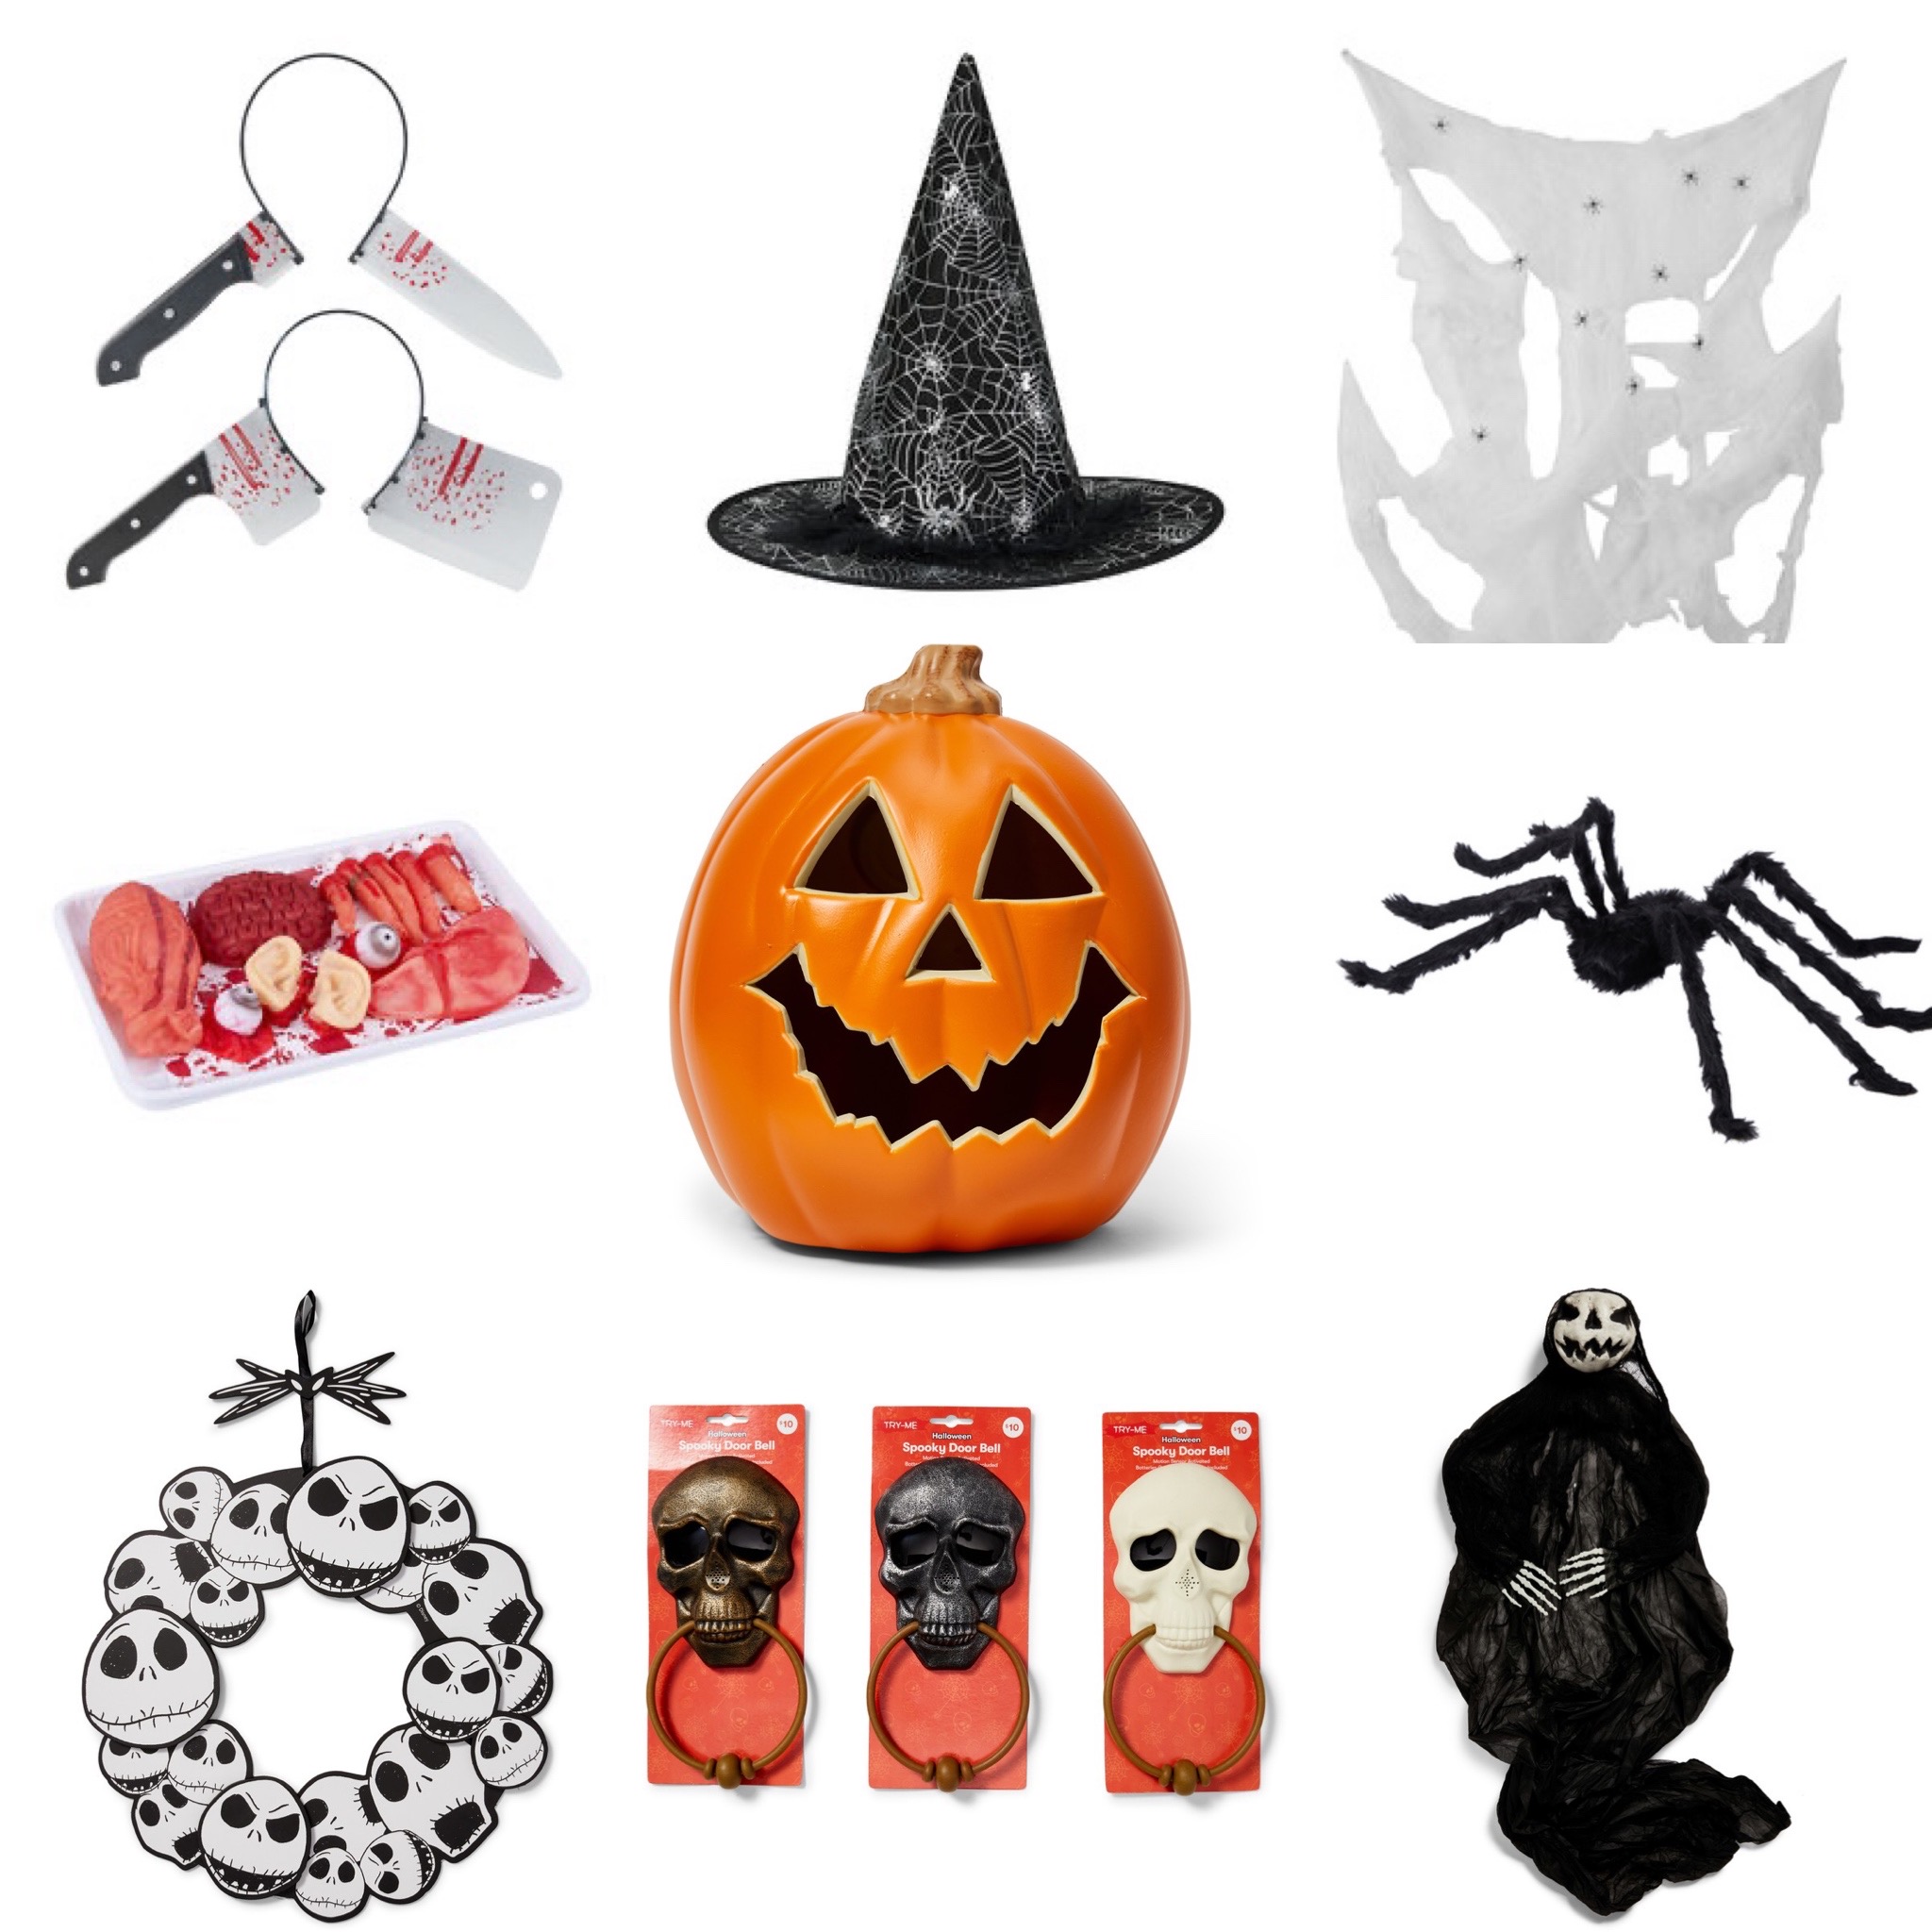 3 halloween decoration kmart to find what you need